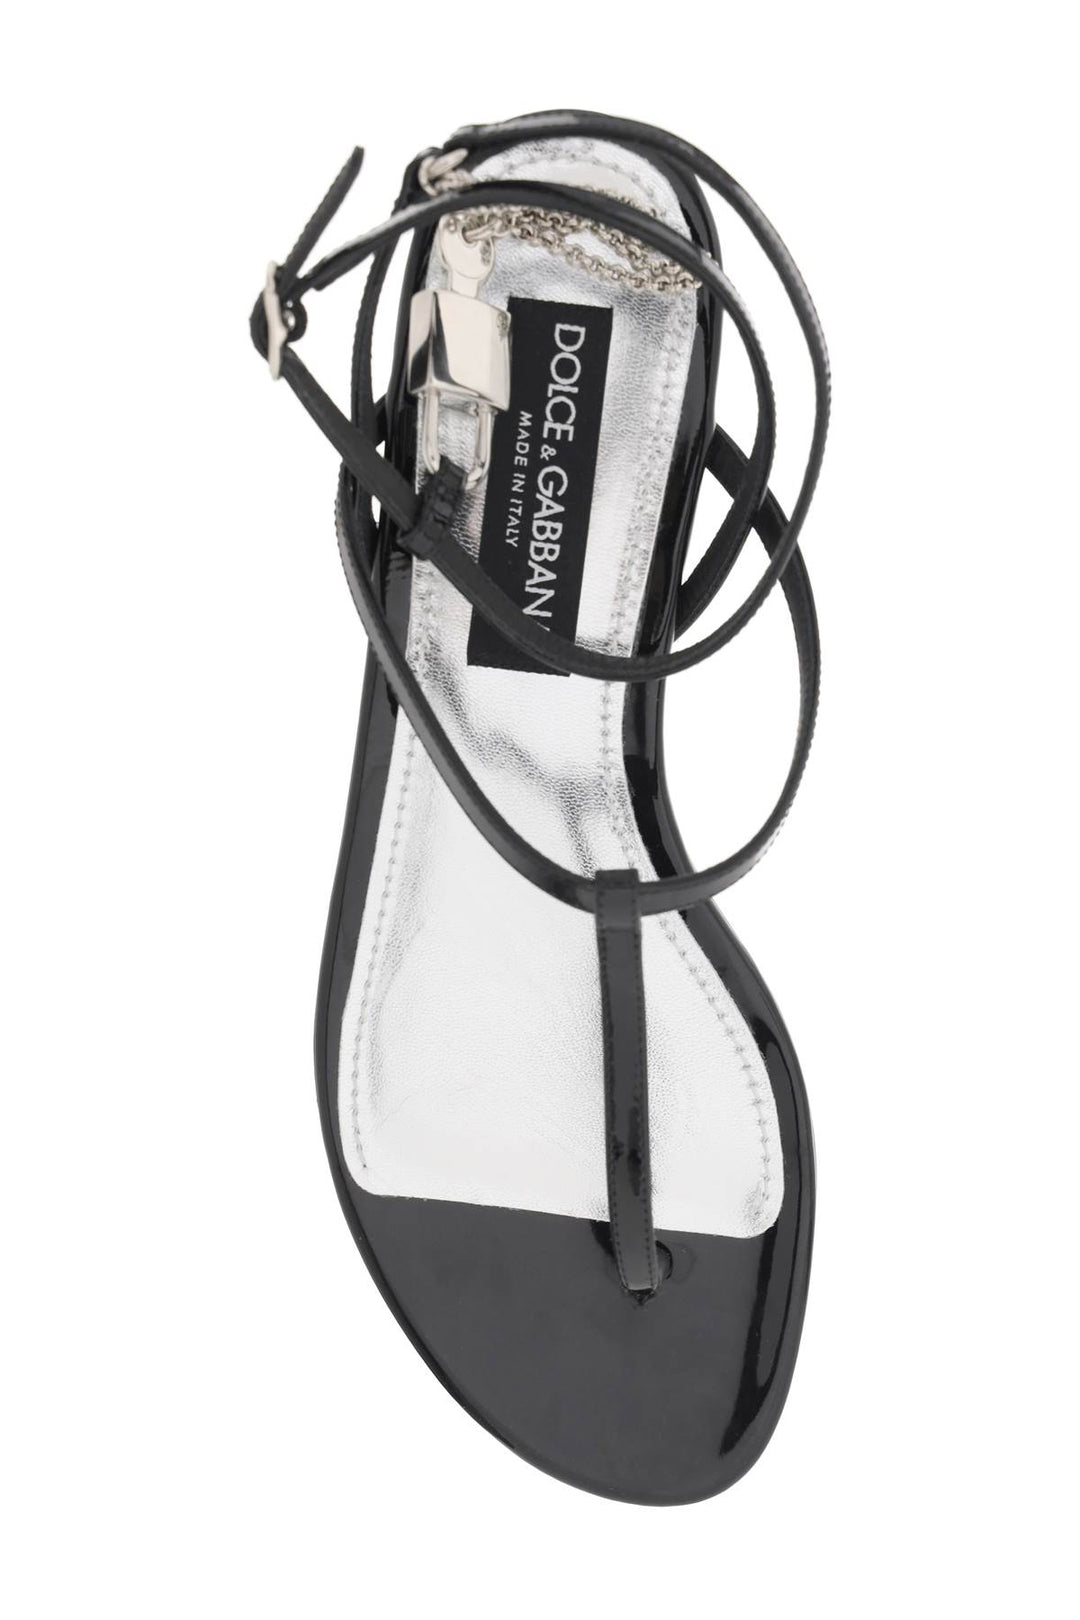 Dolce & gabbana patent leather thong sandals with padlock-1